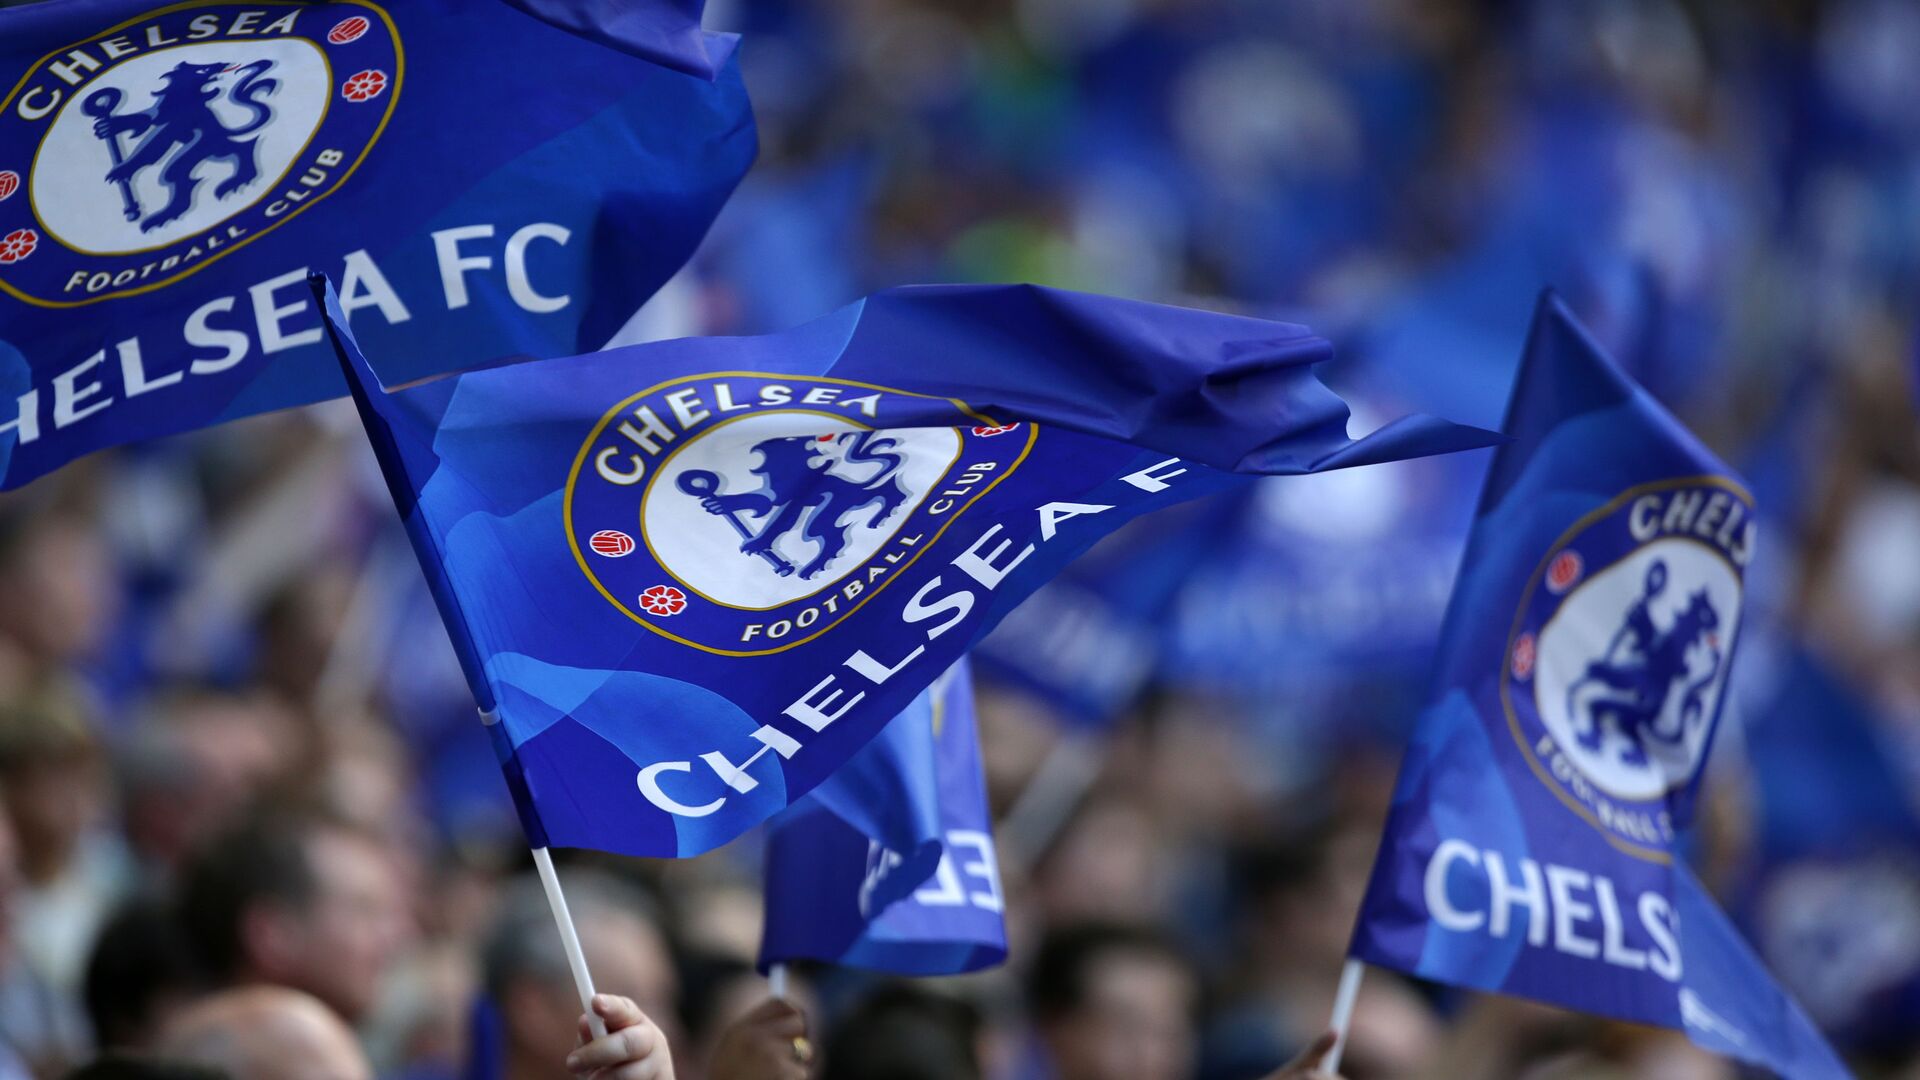 Cheslea supporters wave flags in the crowd ahead of the English FA Community Shield football match between Arsenal and Chelsea at Wembley Stadium - اسپوتنیک افغانستان  , 1920, 21.04.2022